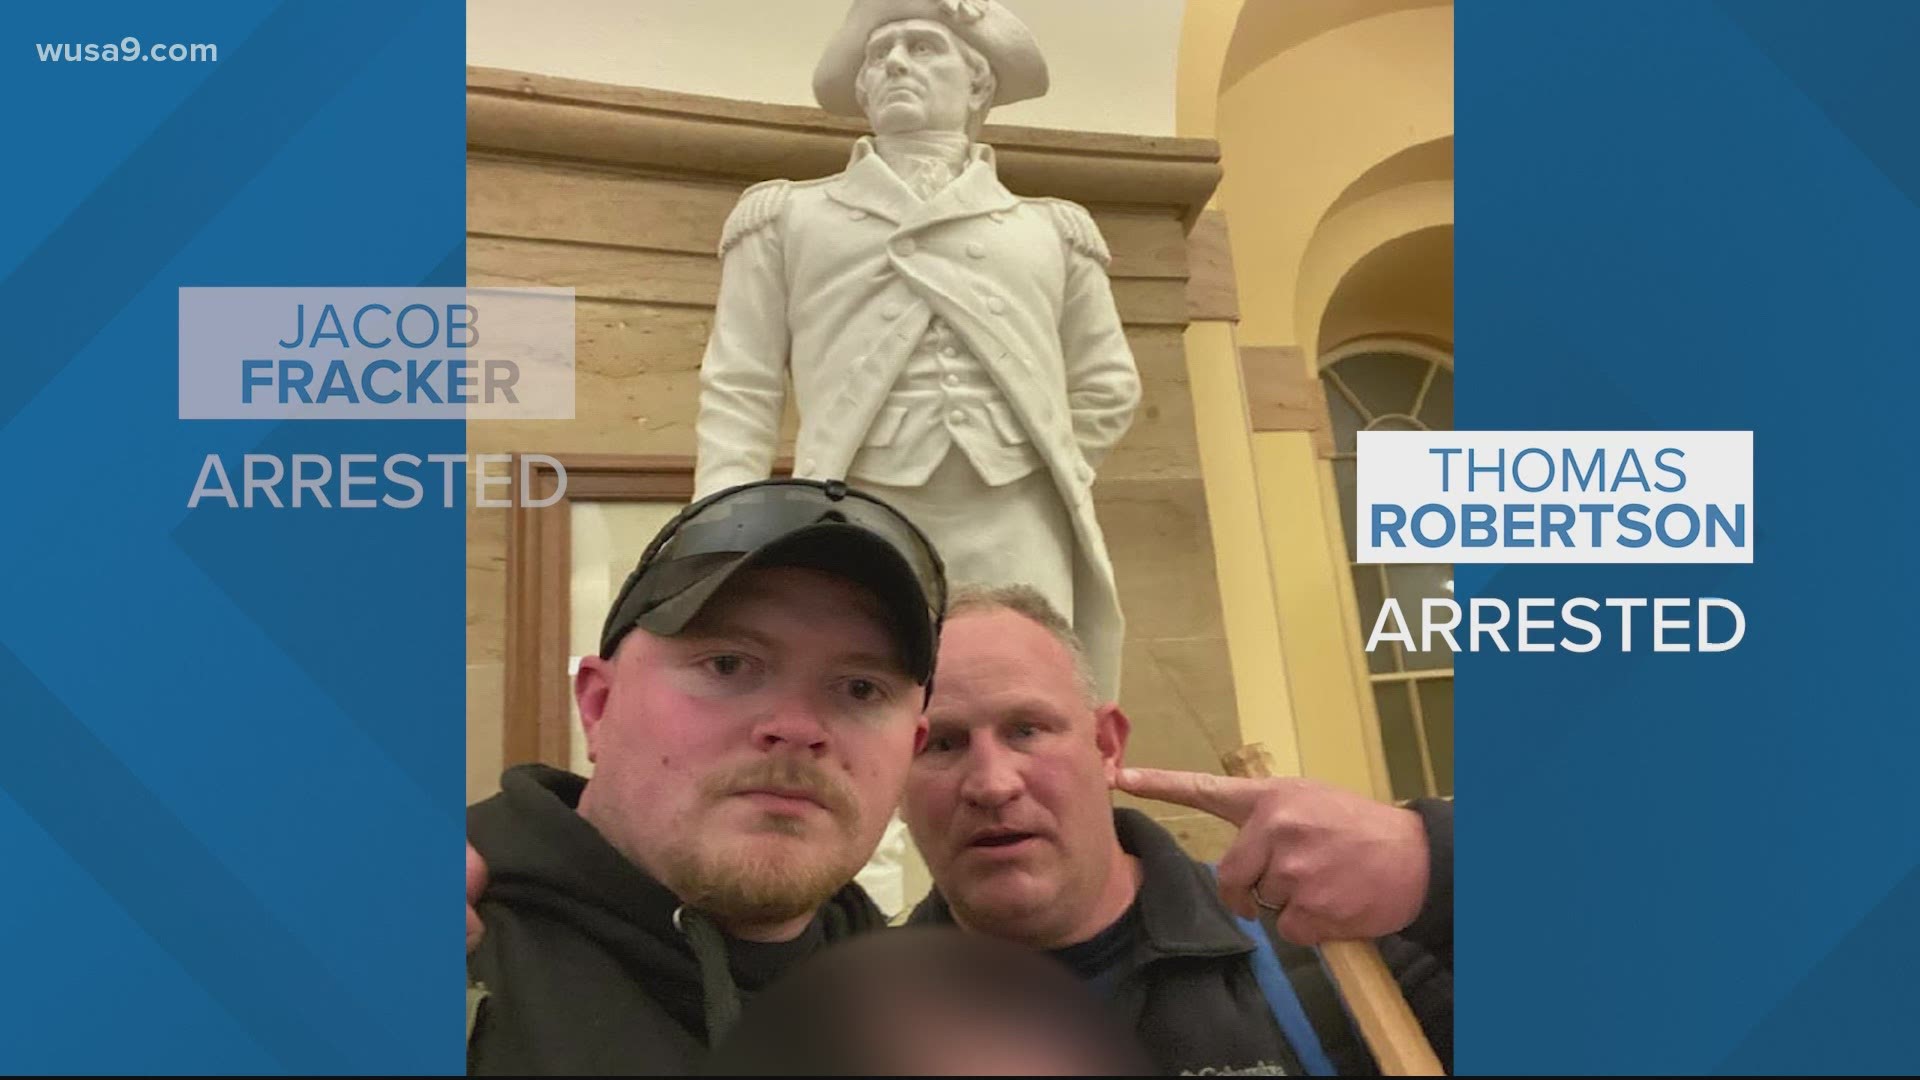 During the last week's riots, the men were allegedly photographed making obscene gestures in front of the John Stark statue.